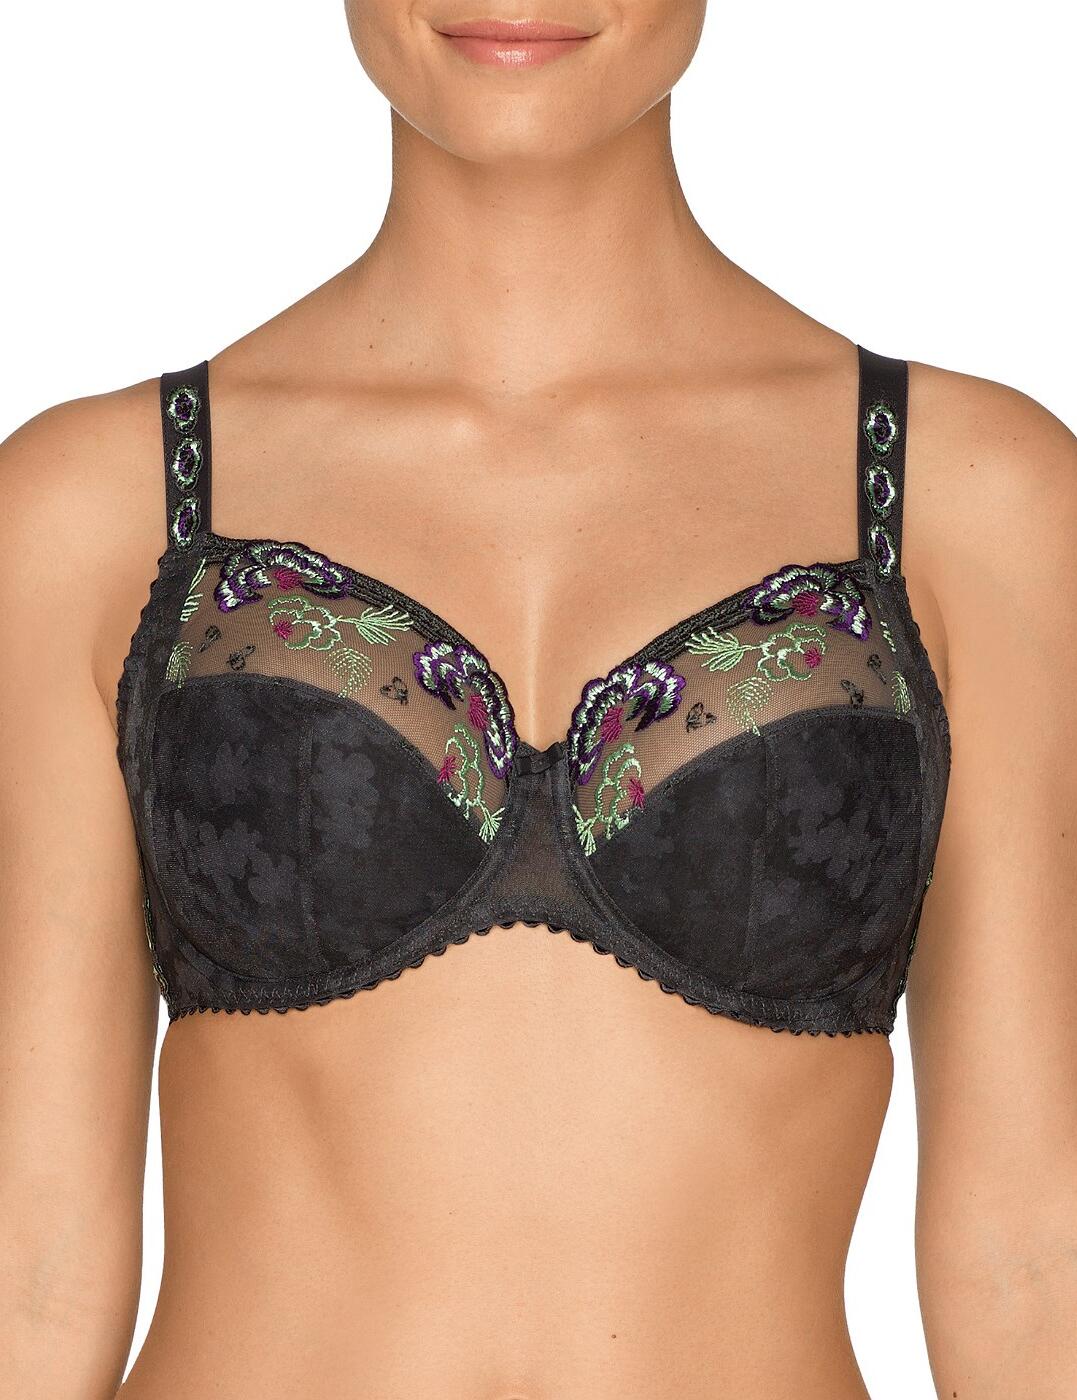 Prima Donna Madam Butterfly Full Cup Bra - Belle Lingerie